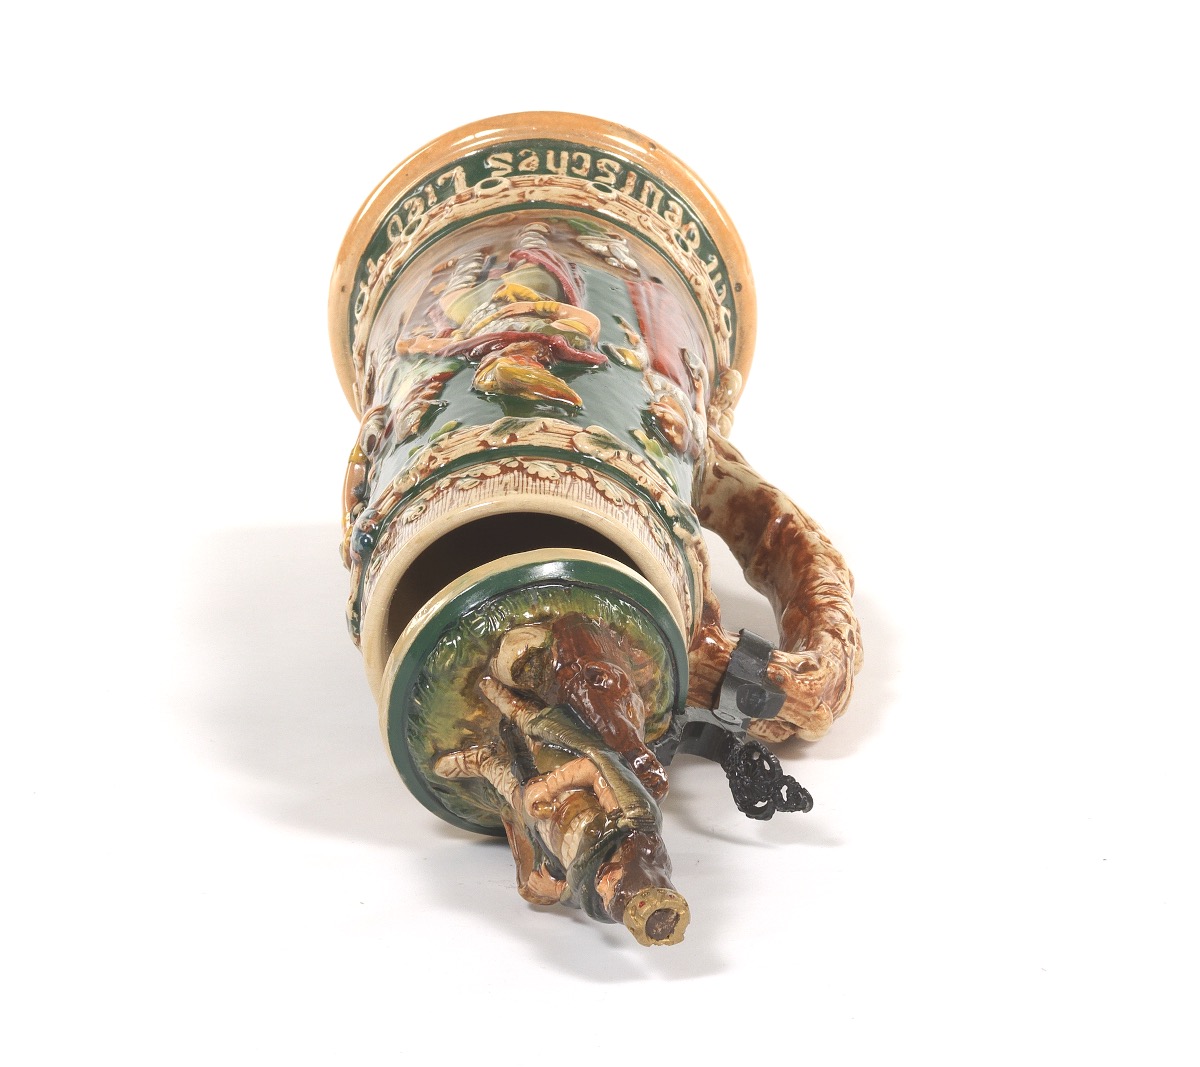 German Ceramic Stein "The Ring of the Nibelung" - Image 7 of 10